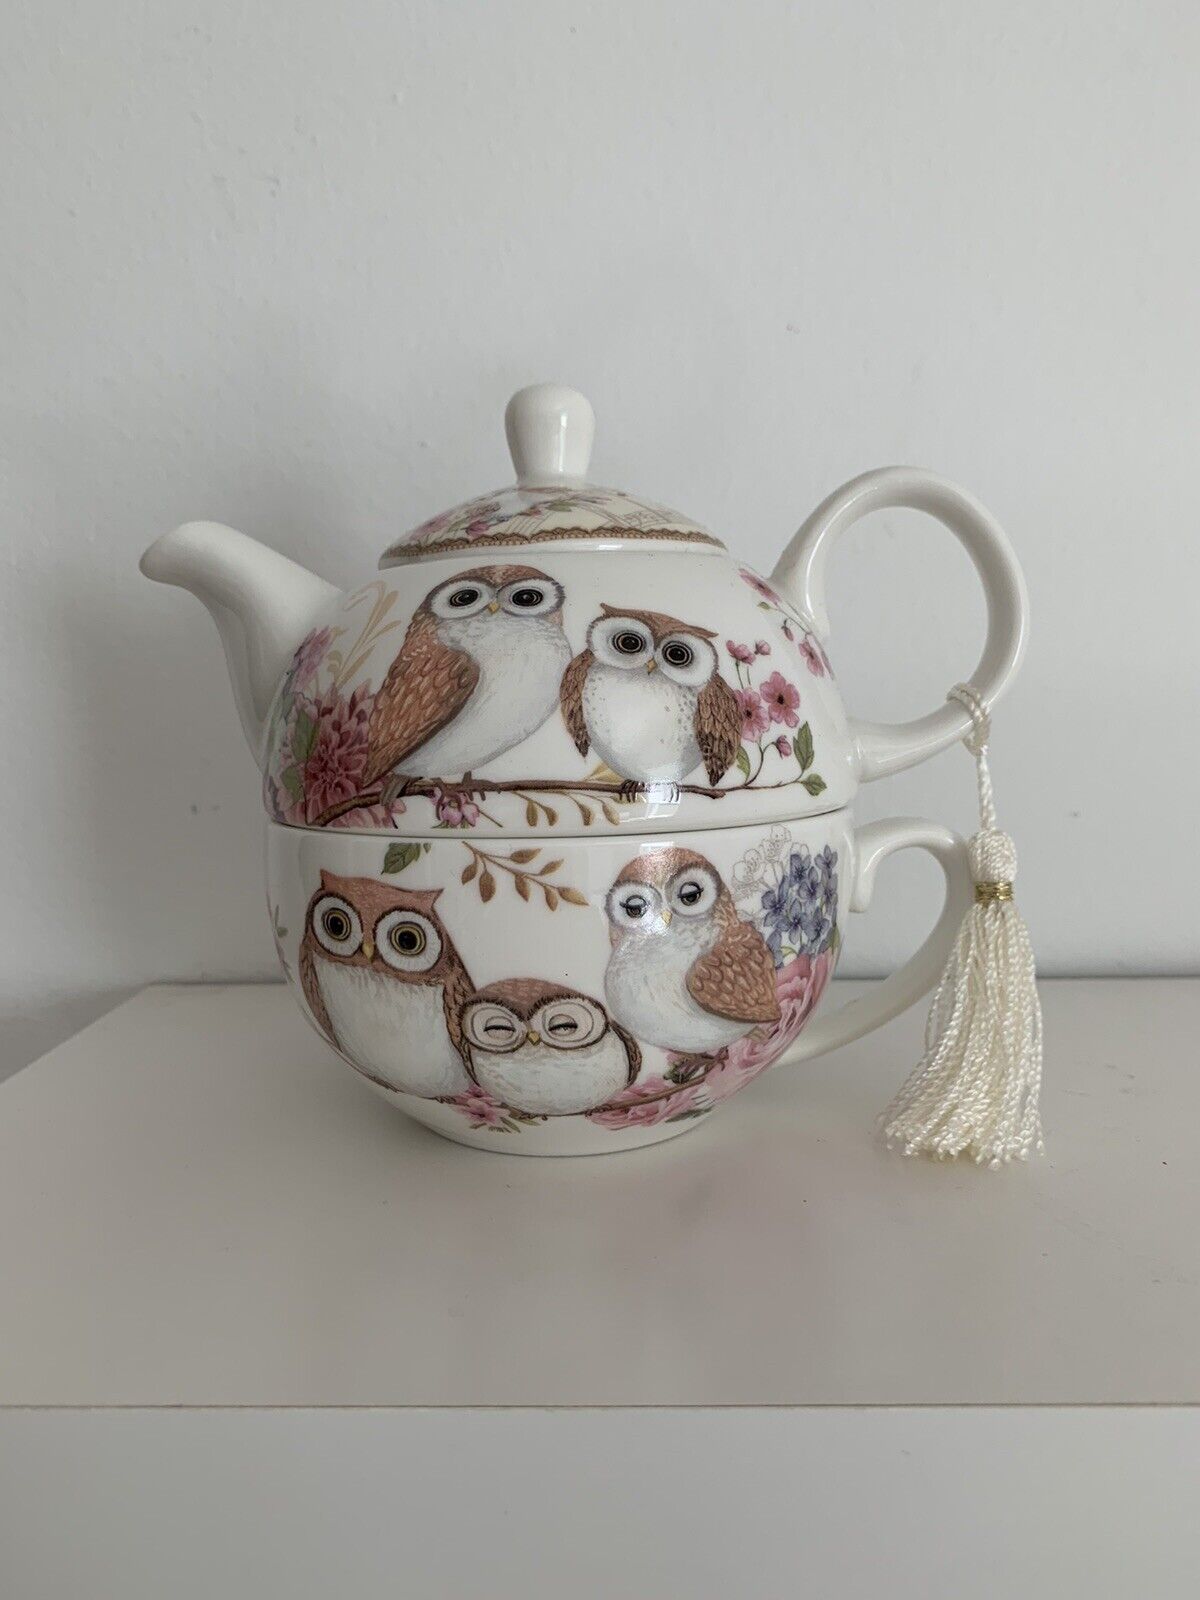 Bits and Pieces Owls Tea For One Porcelain Teapot and Cup Original Tassle NWOB